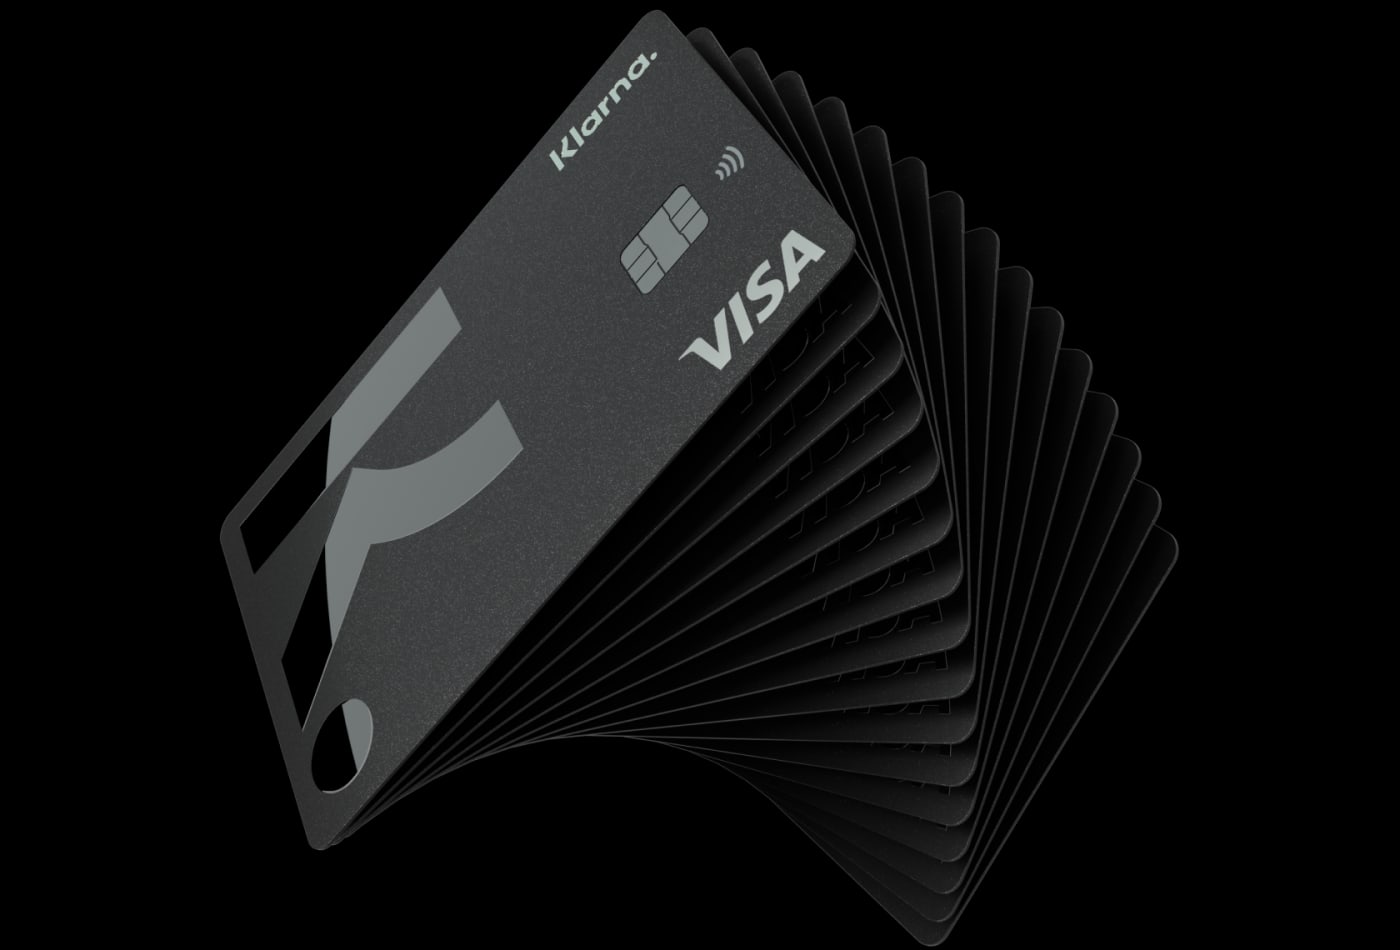 Buy now, pay later firm Klarna launches physical card in the UK